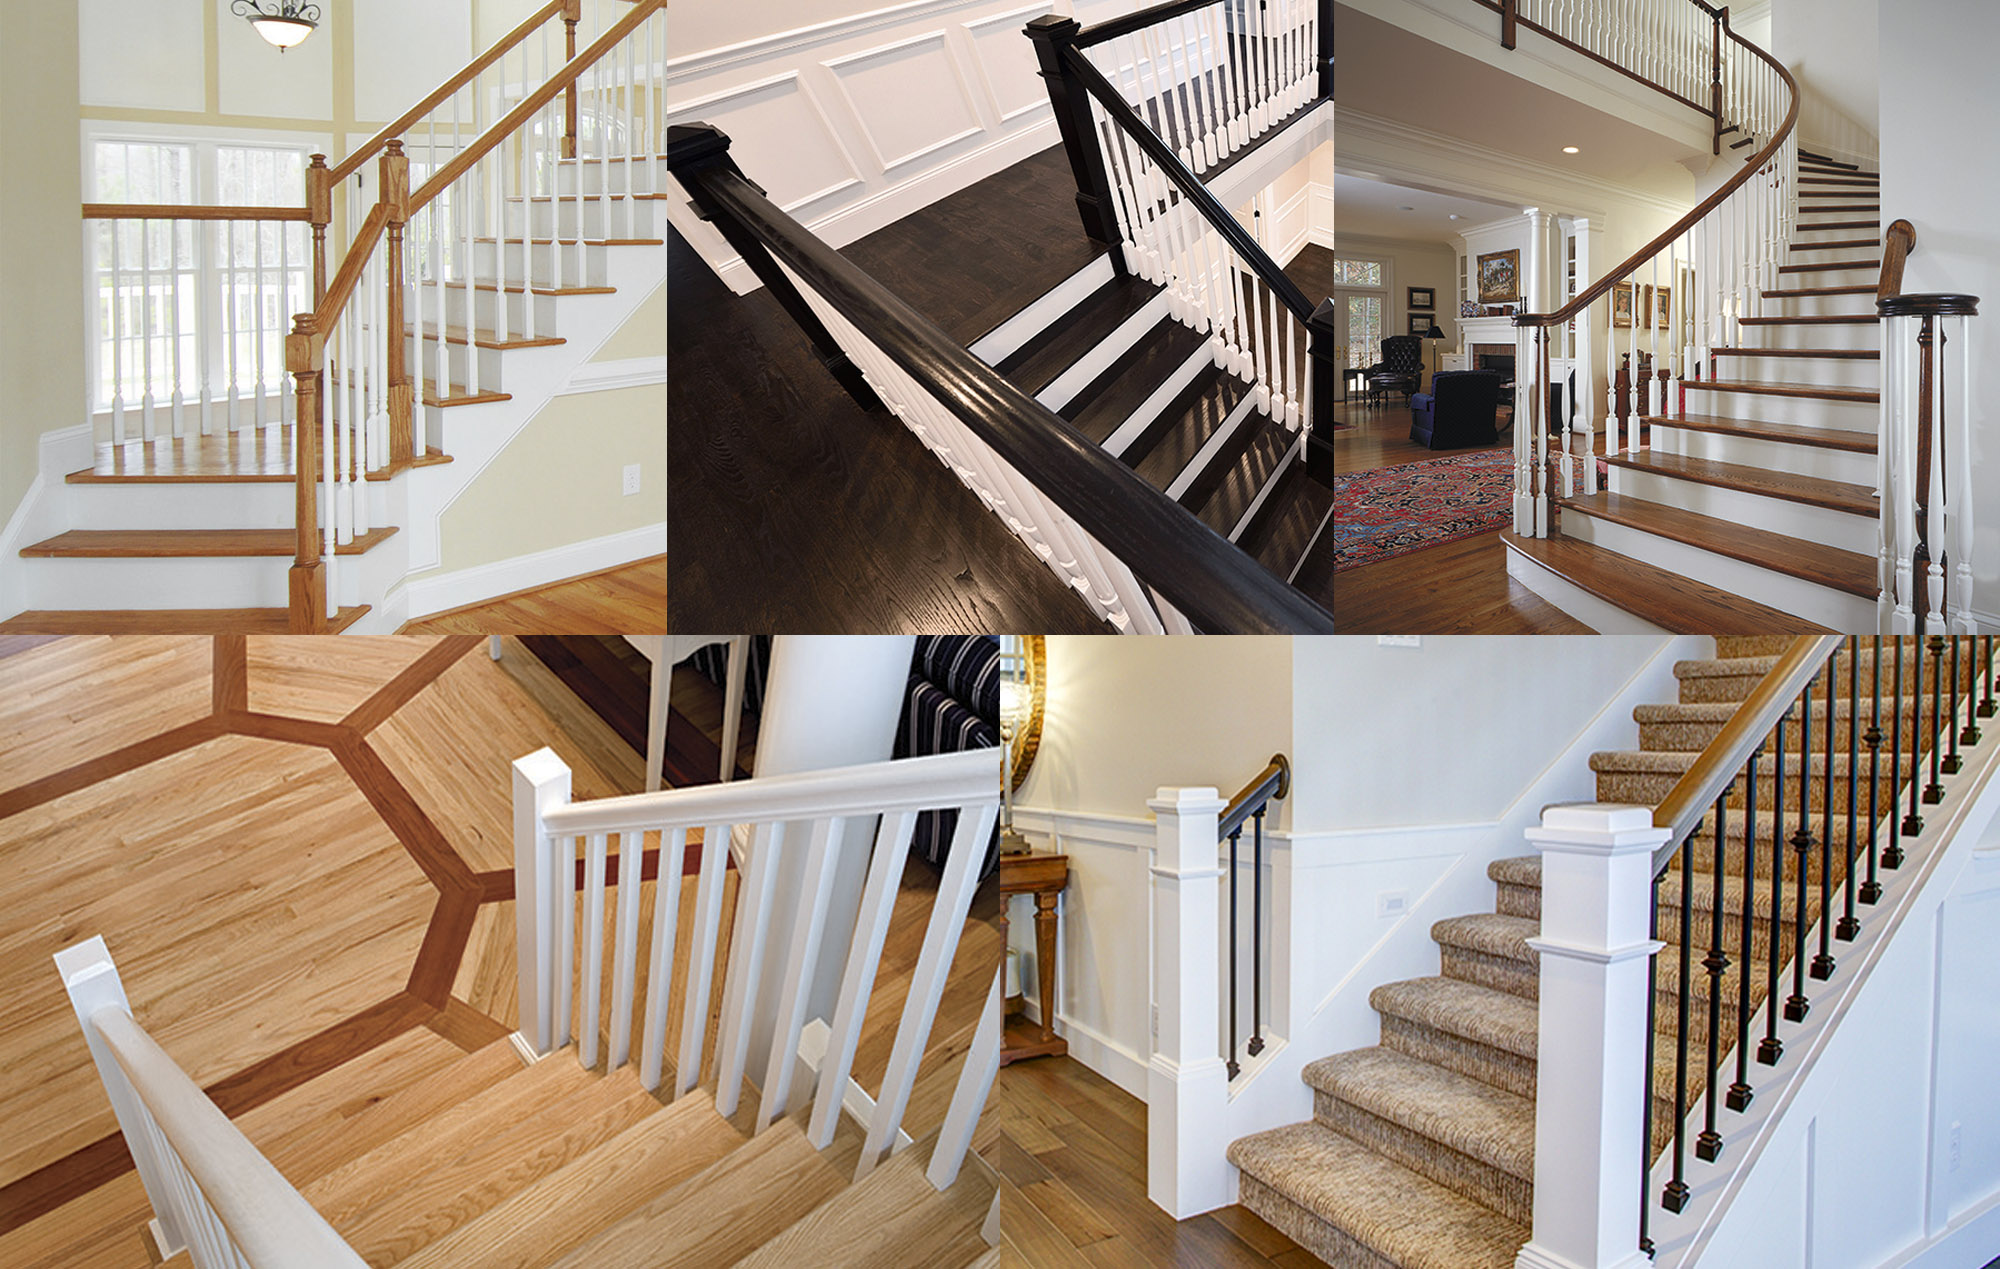 5 Common Design Styles for Stairs—What Are They? How Are They Different?